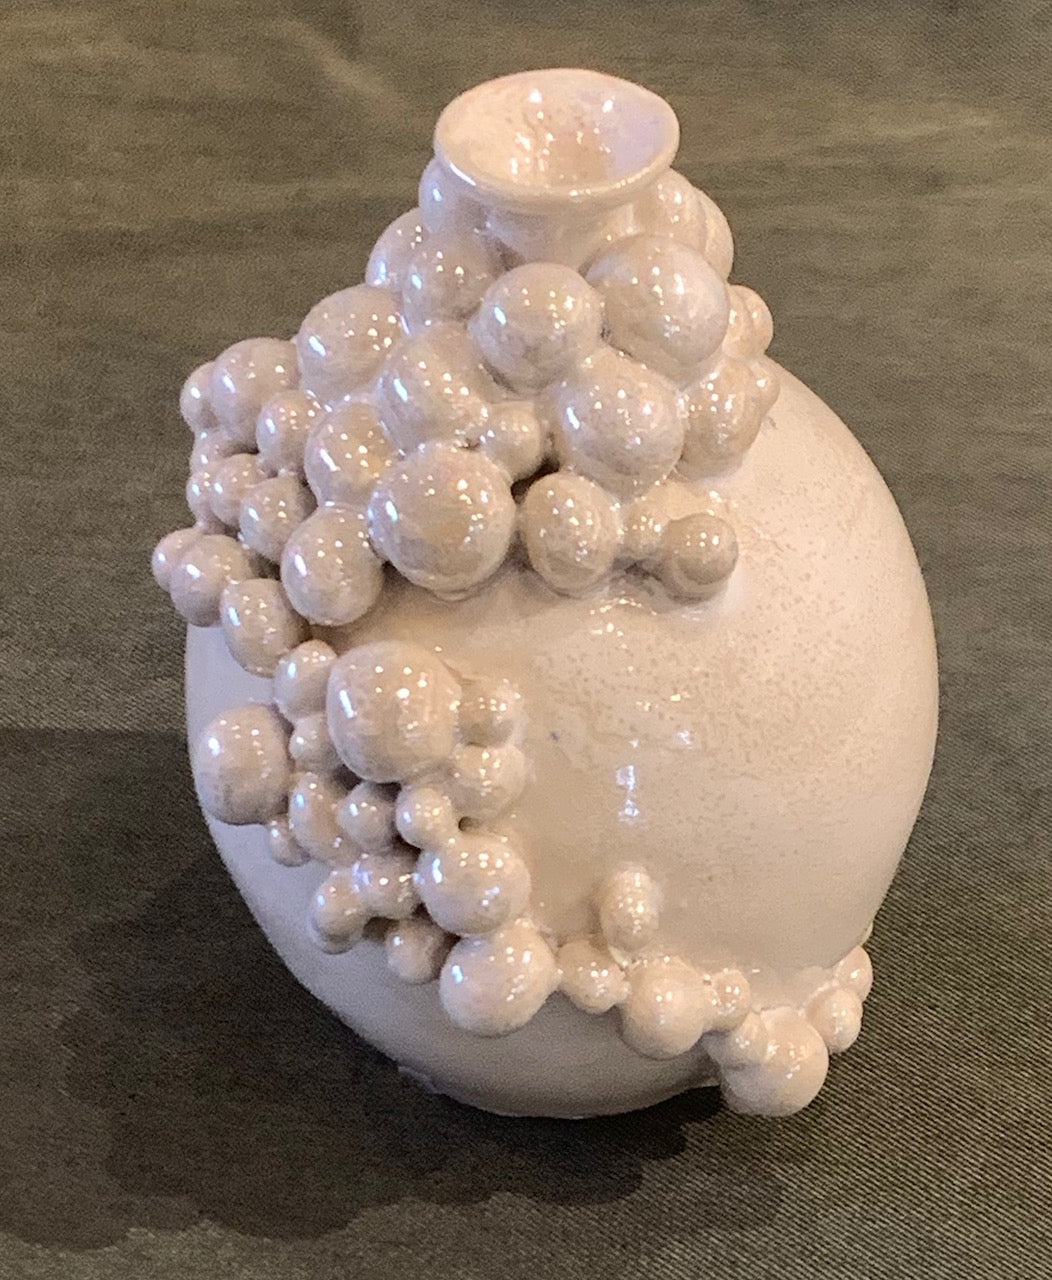 Small "Mother-of-pearl" bud Vase